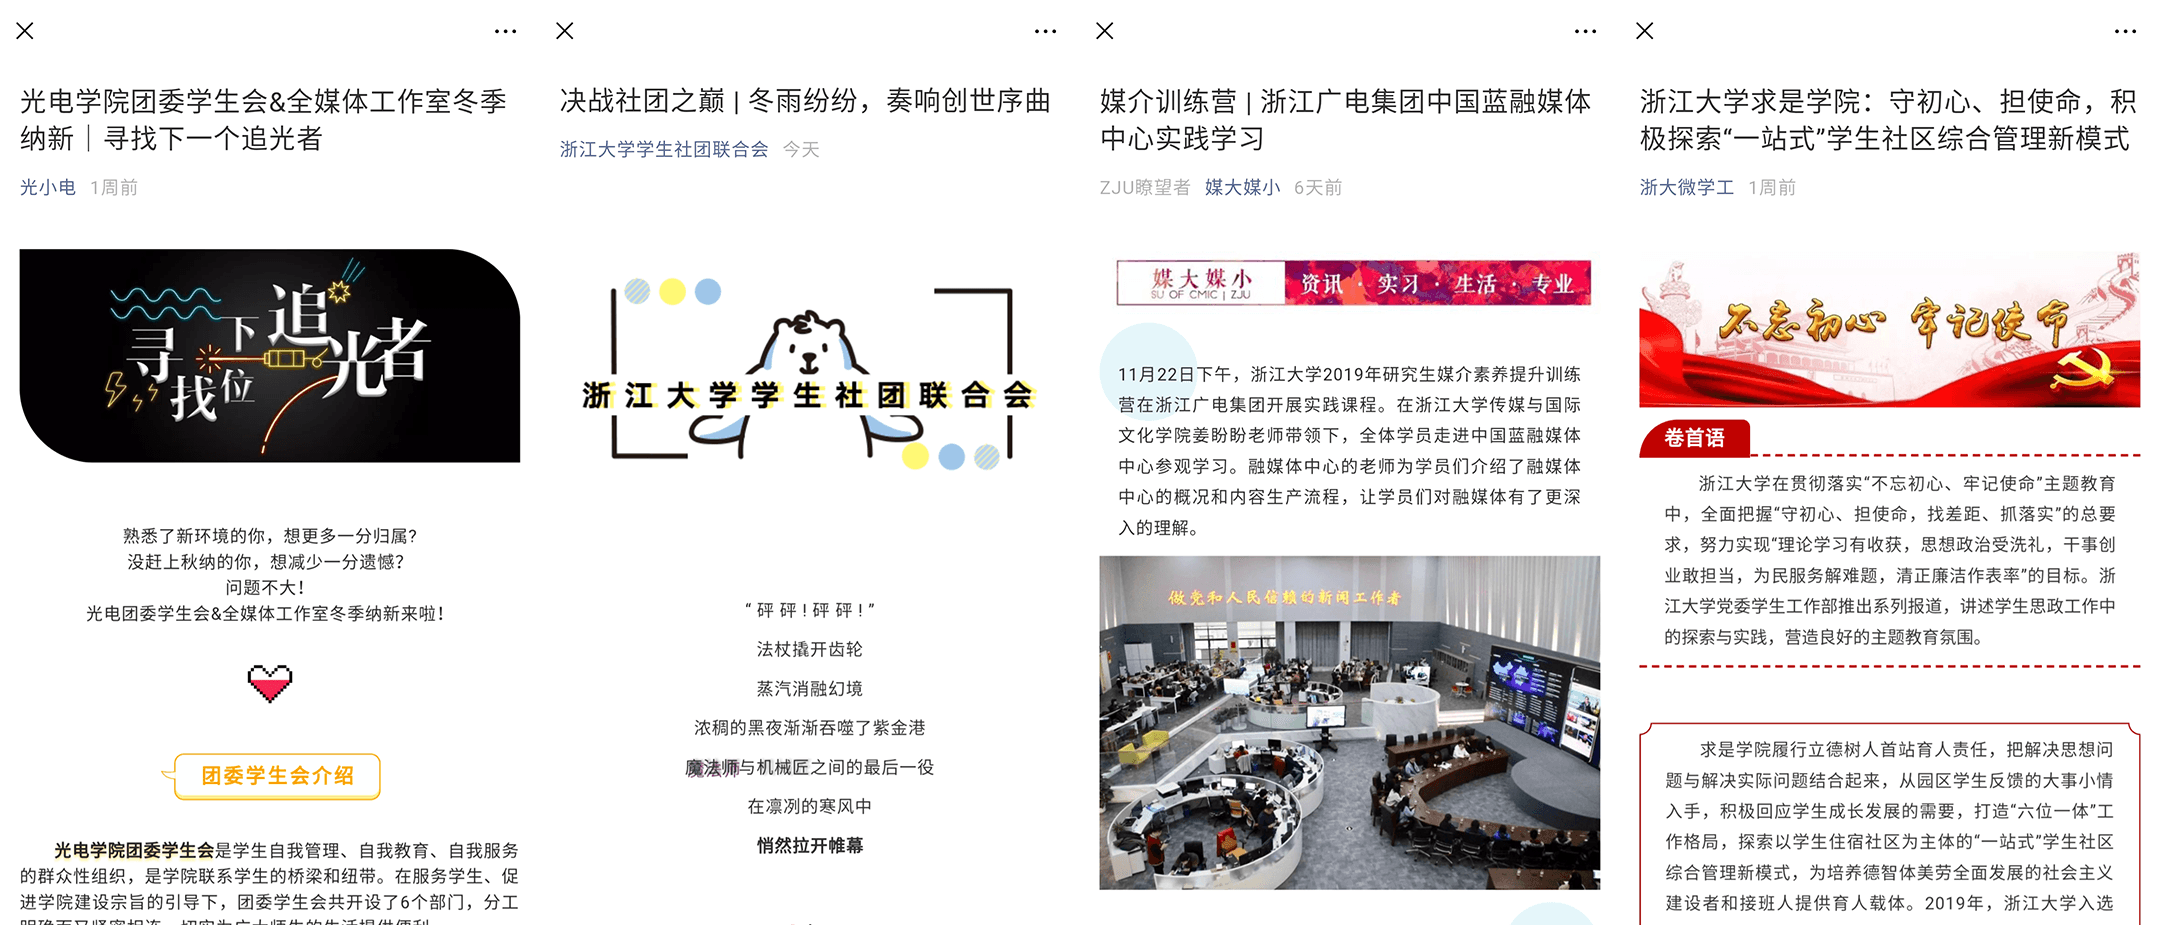 four-kinds-of-articles-in-wechat.png